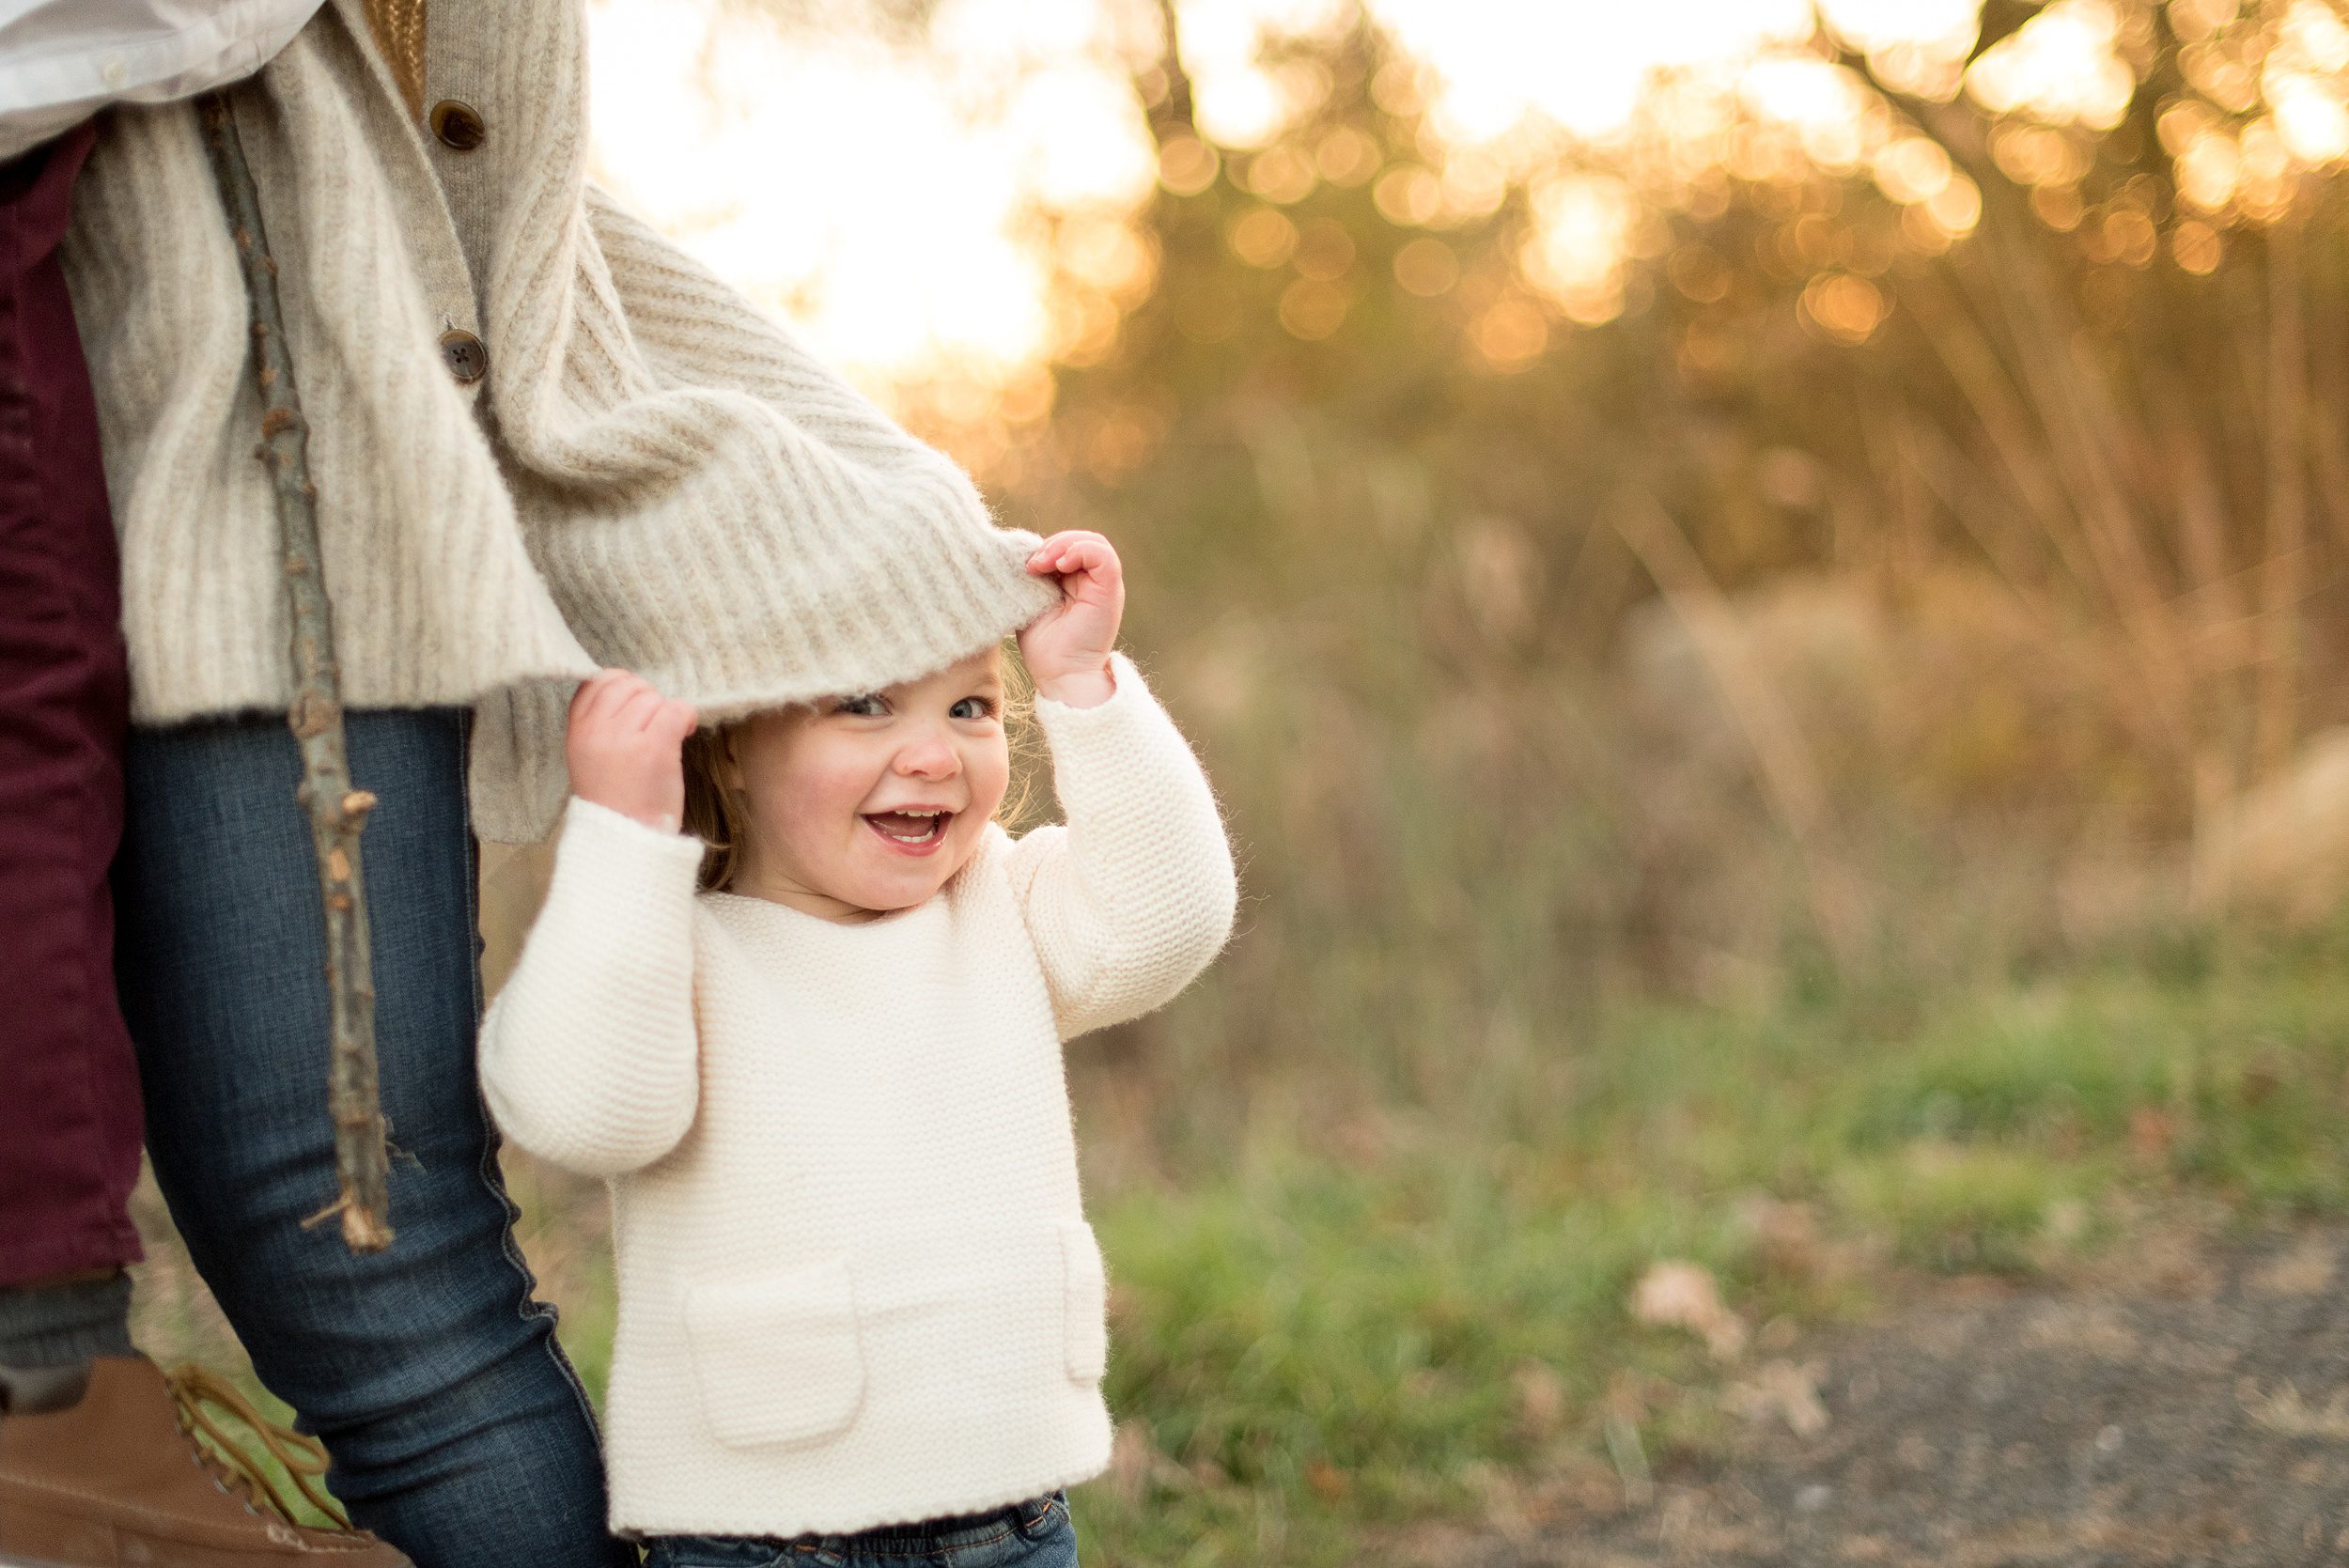 A young girl in a white sweater hides under mom's beige sweater while standing in a park at sunset